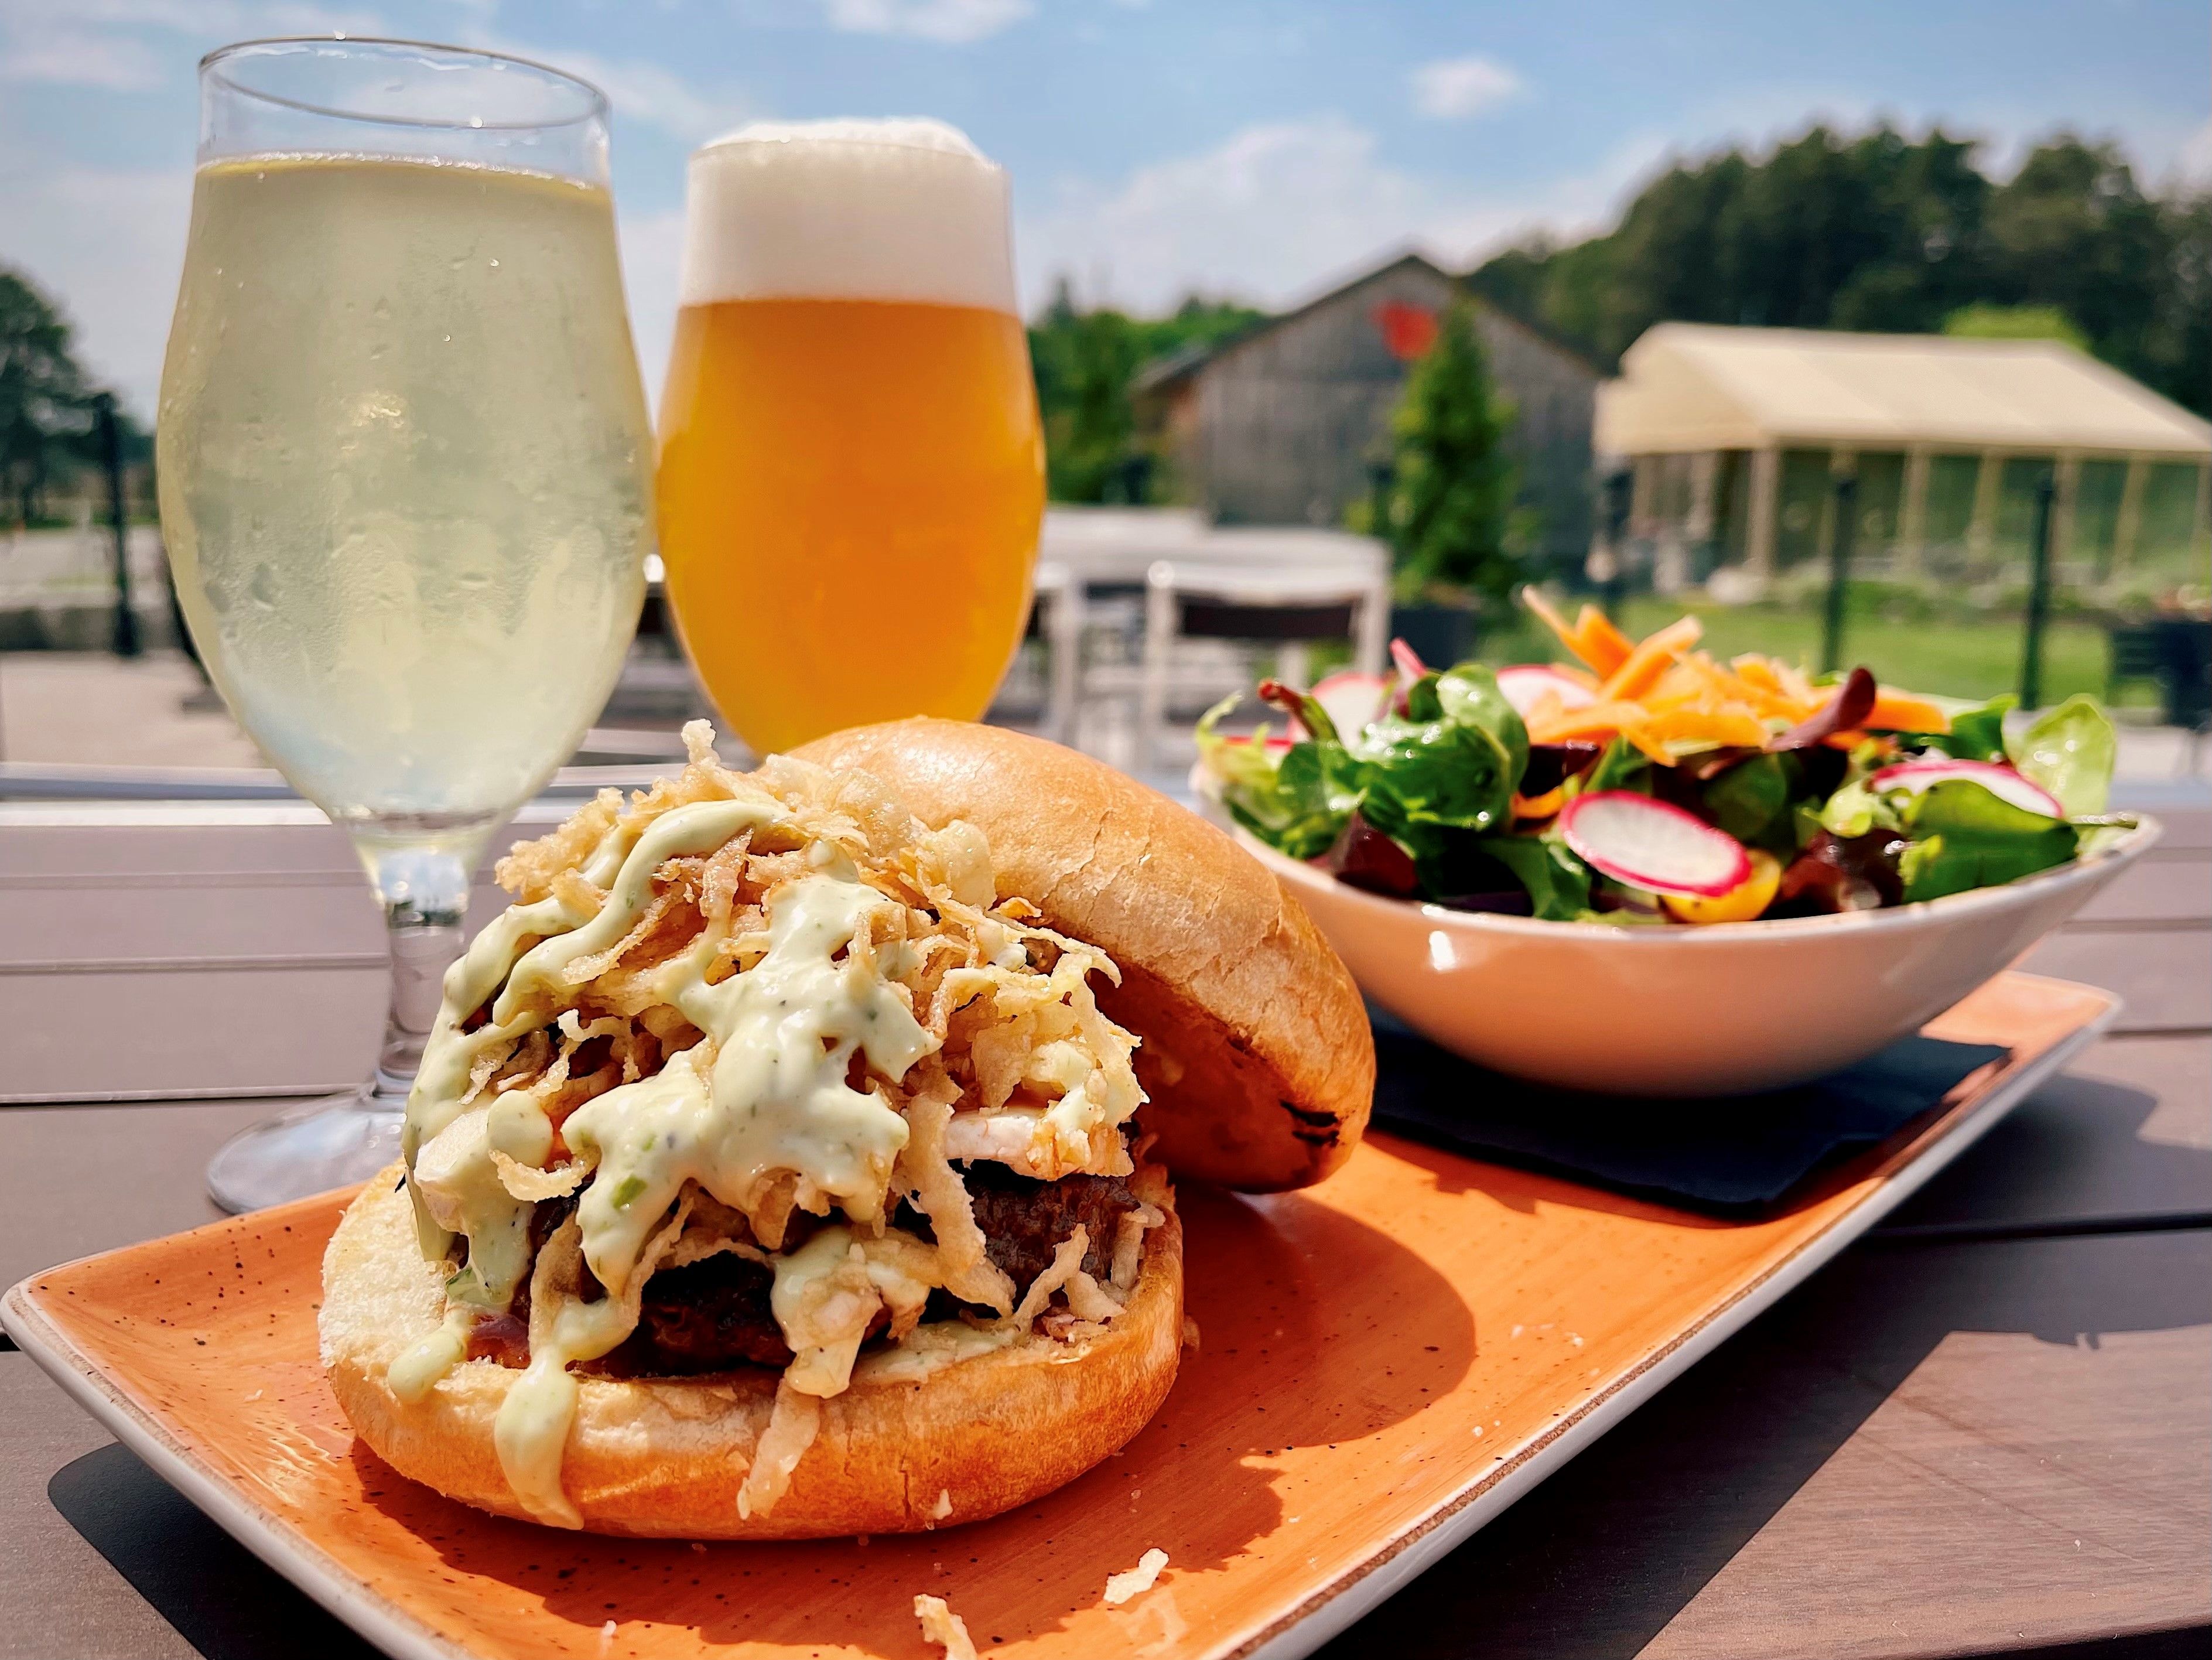 Image of a bison burger from Slabtown Cider on a picnic table with a glasses of cider and beer in the background